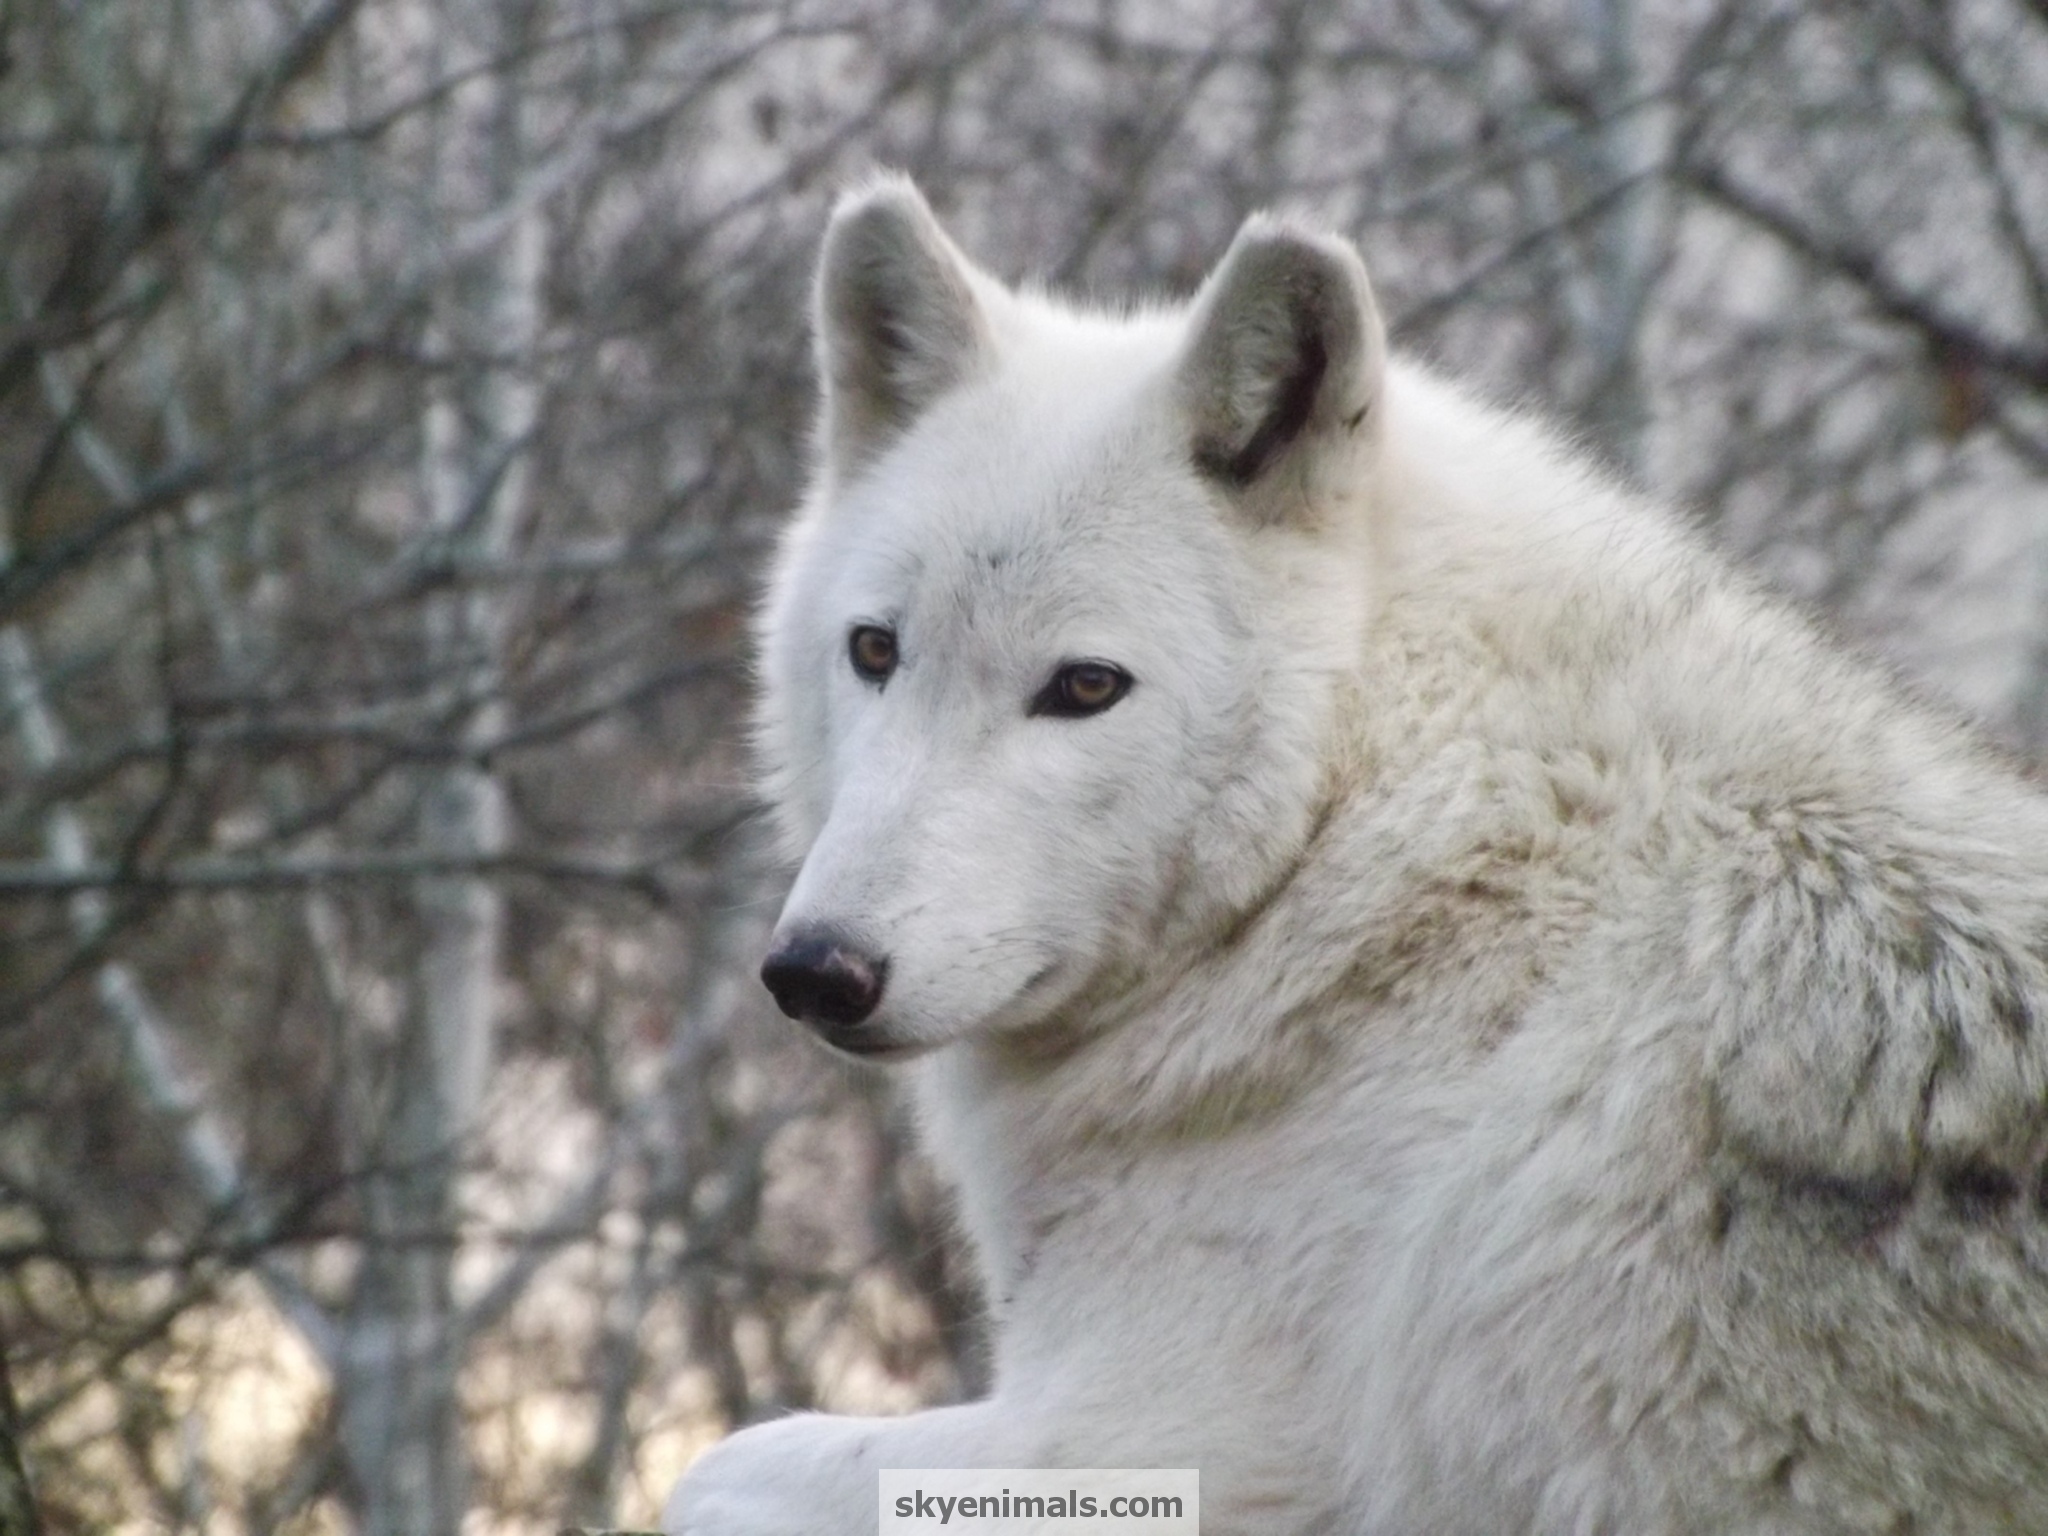 What are some interesting facts about gray wolves?